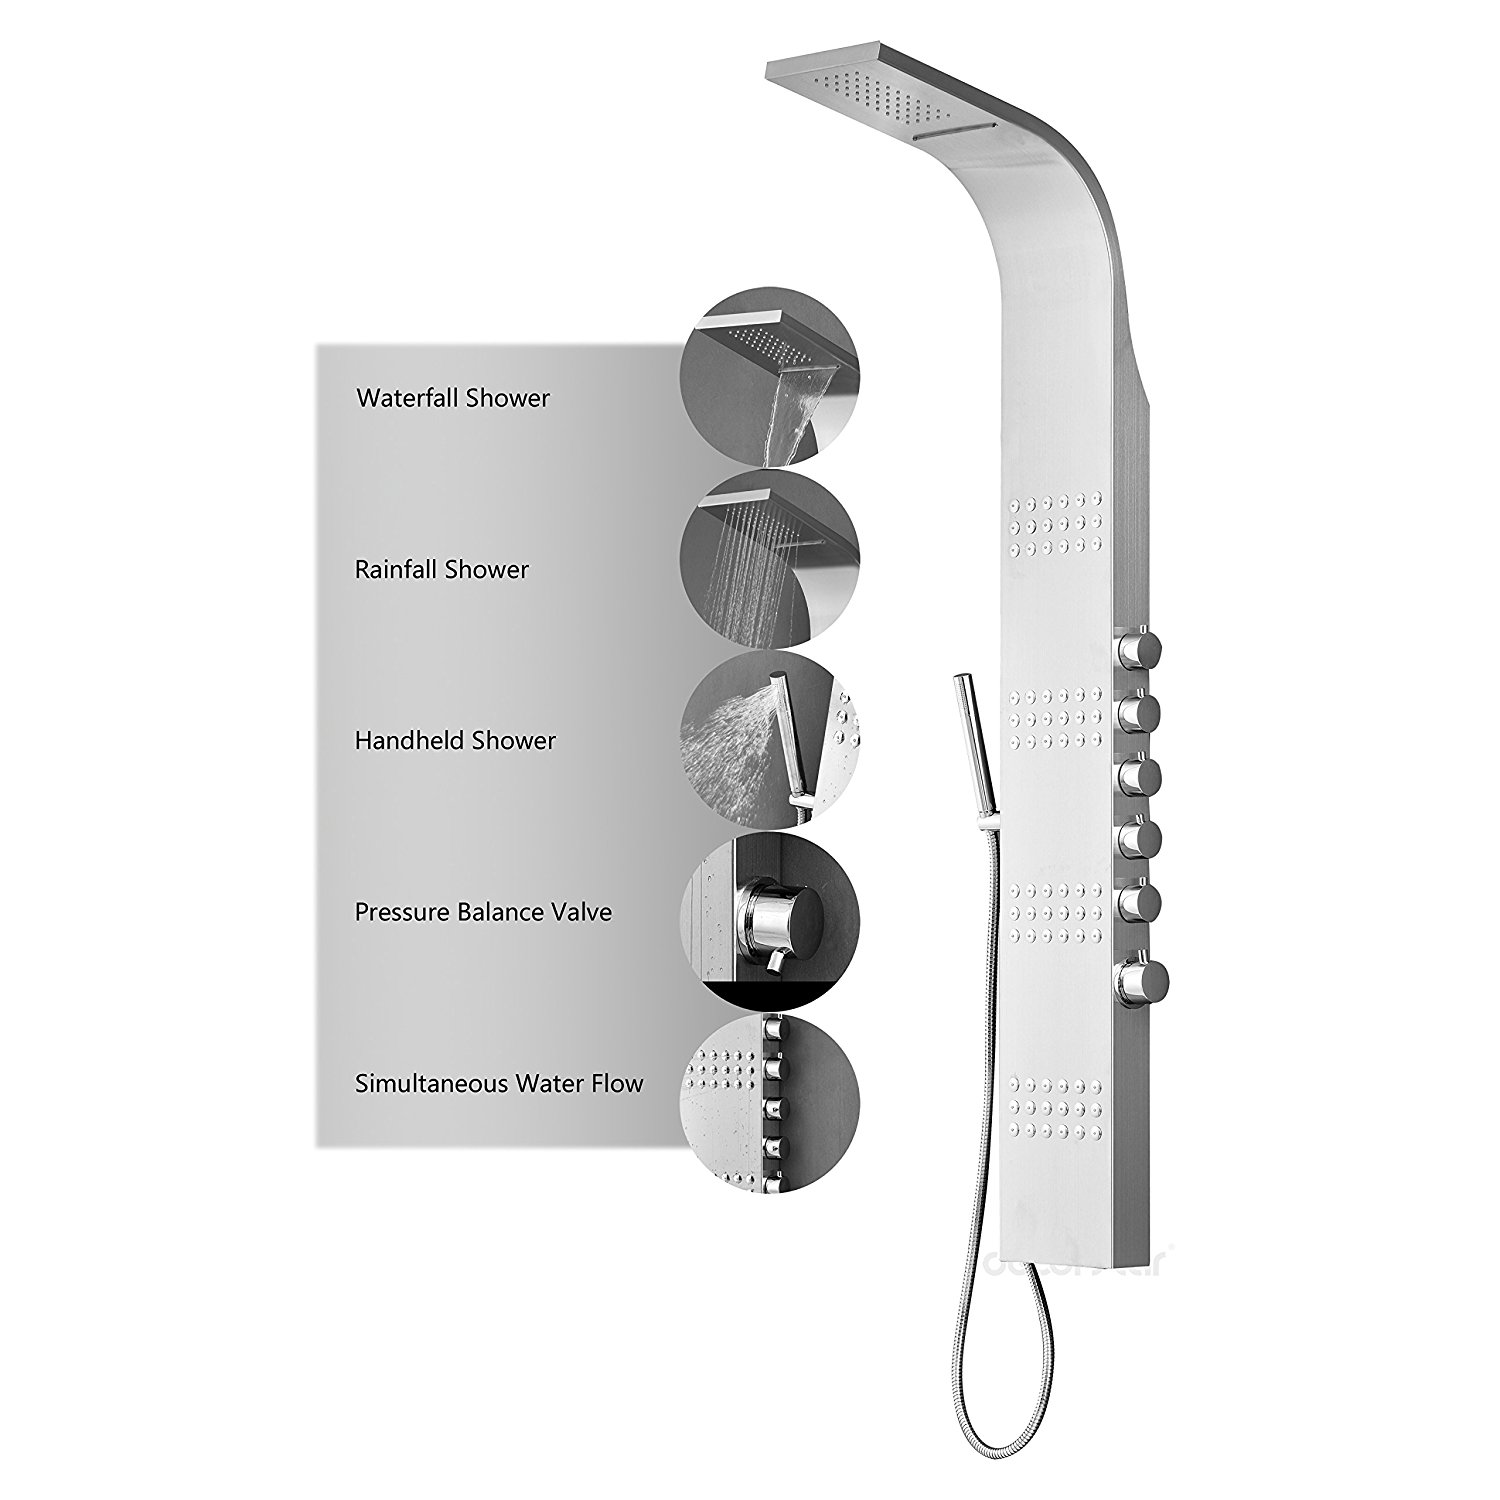 Tumbes Stainless Steel Rainfall Shower Panel System